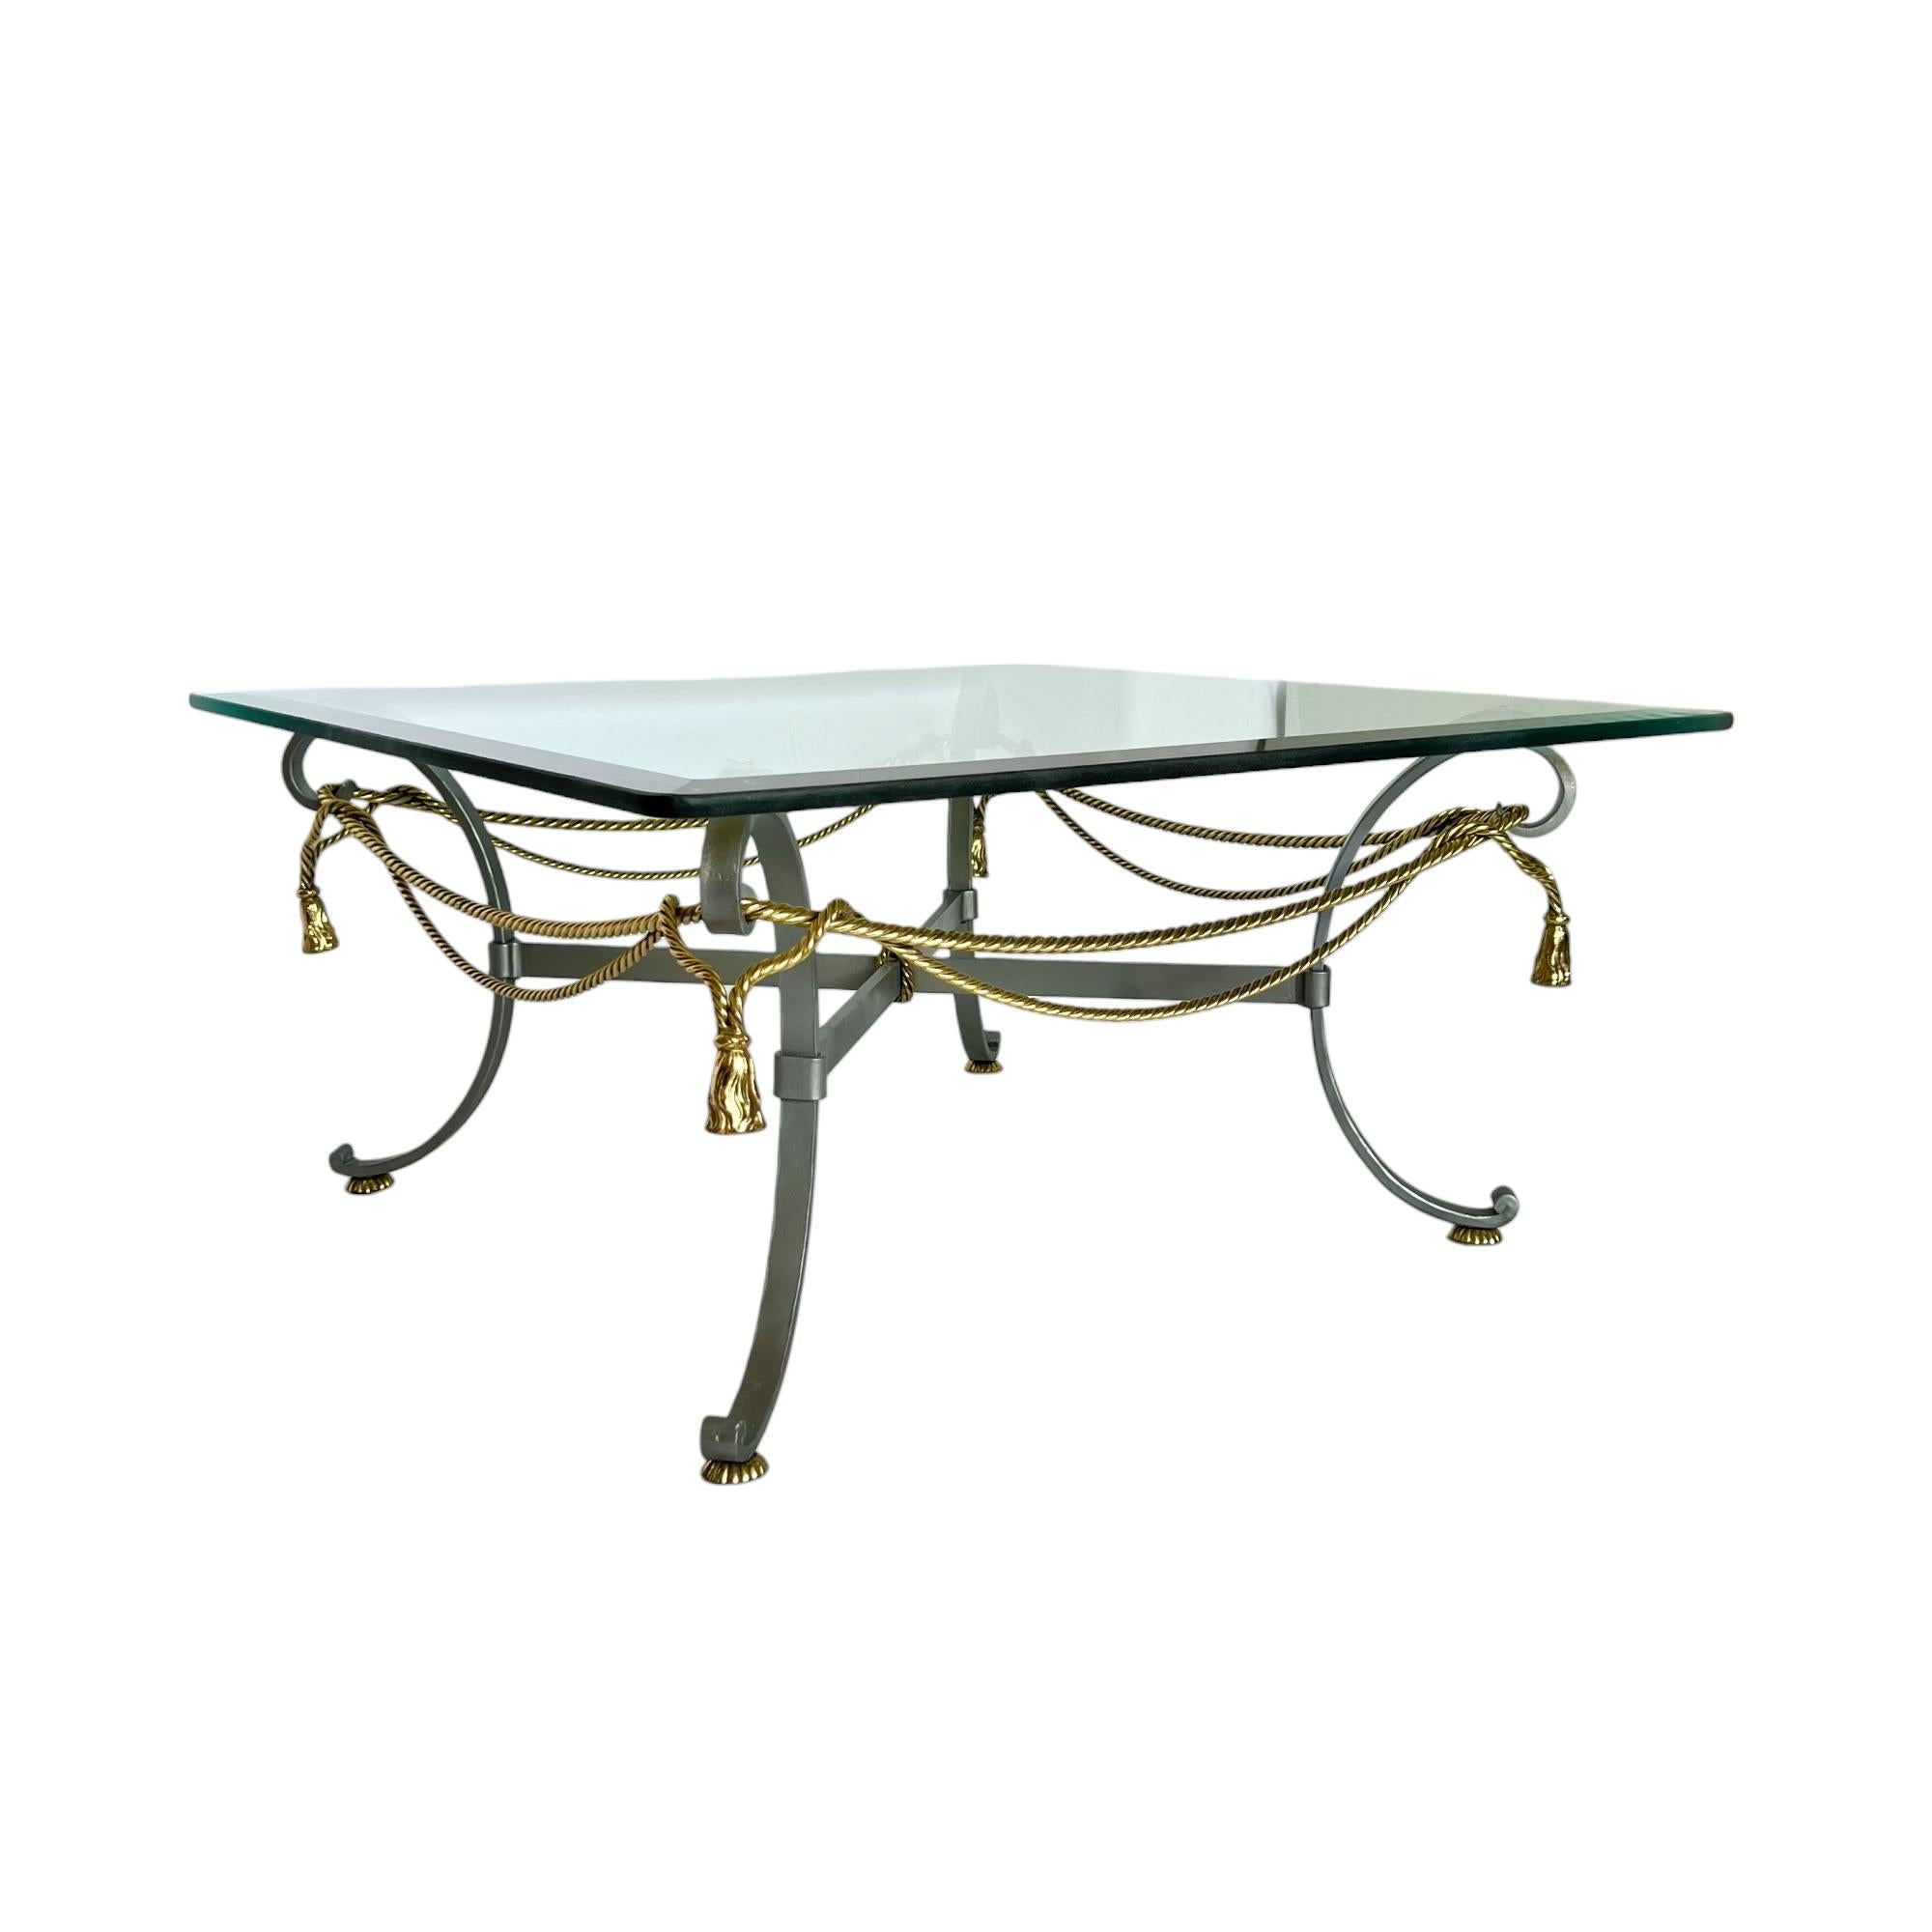 A vintage 1970's Italian Hollywood Regency style mixed metal coffee table featuring a satin finish steel frame accented with brass swag ropes, tassels and feet. It has a square beveled glass topper with rounded corners (approximately 1/2